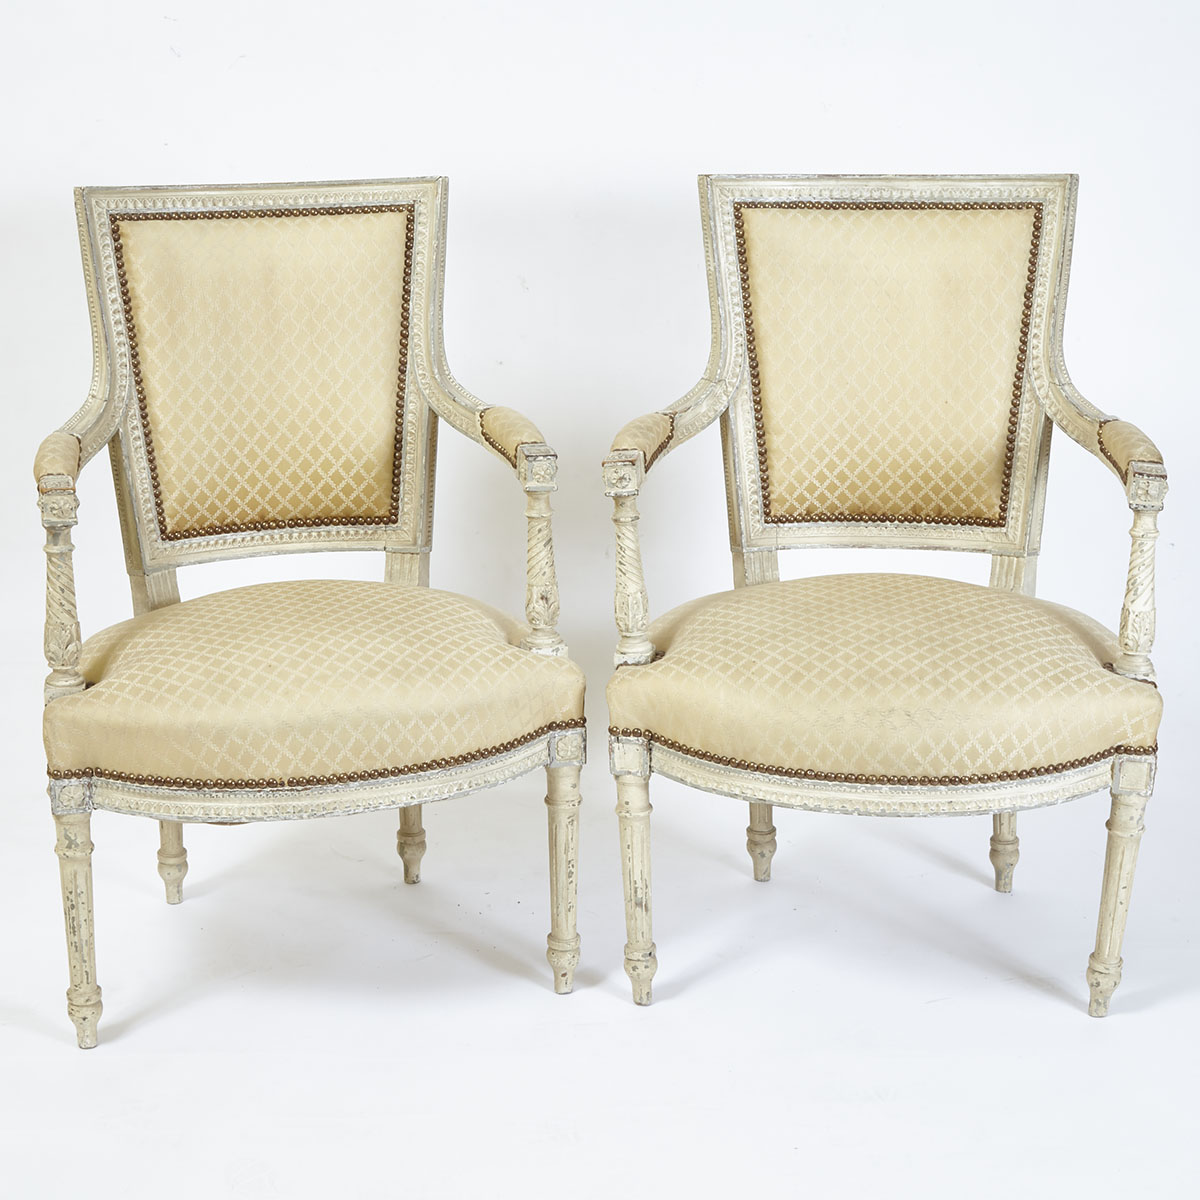 Pair of Painted Louis XVI Style Fauteuils, French, early 19th century